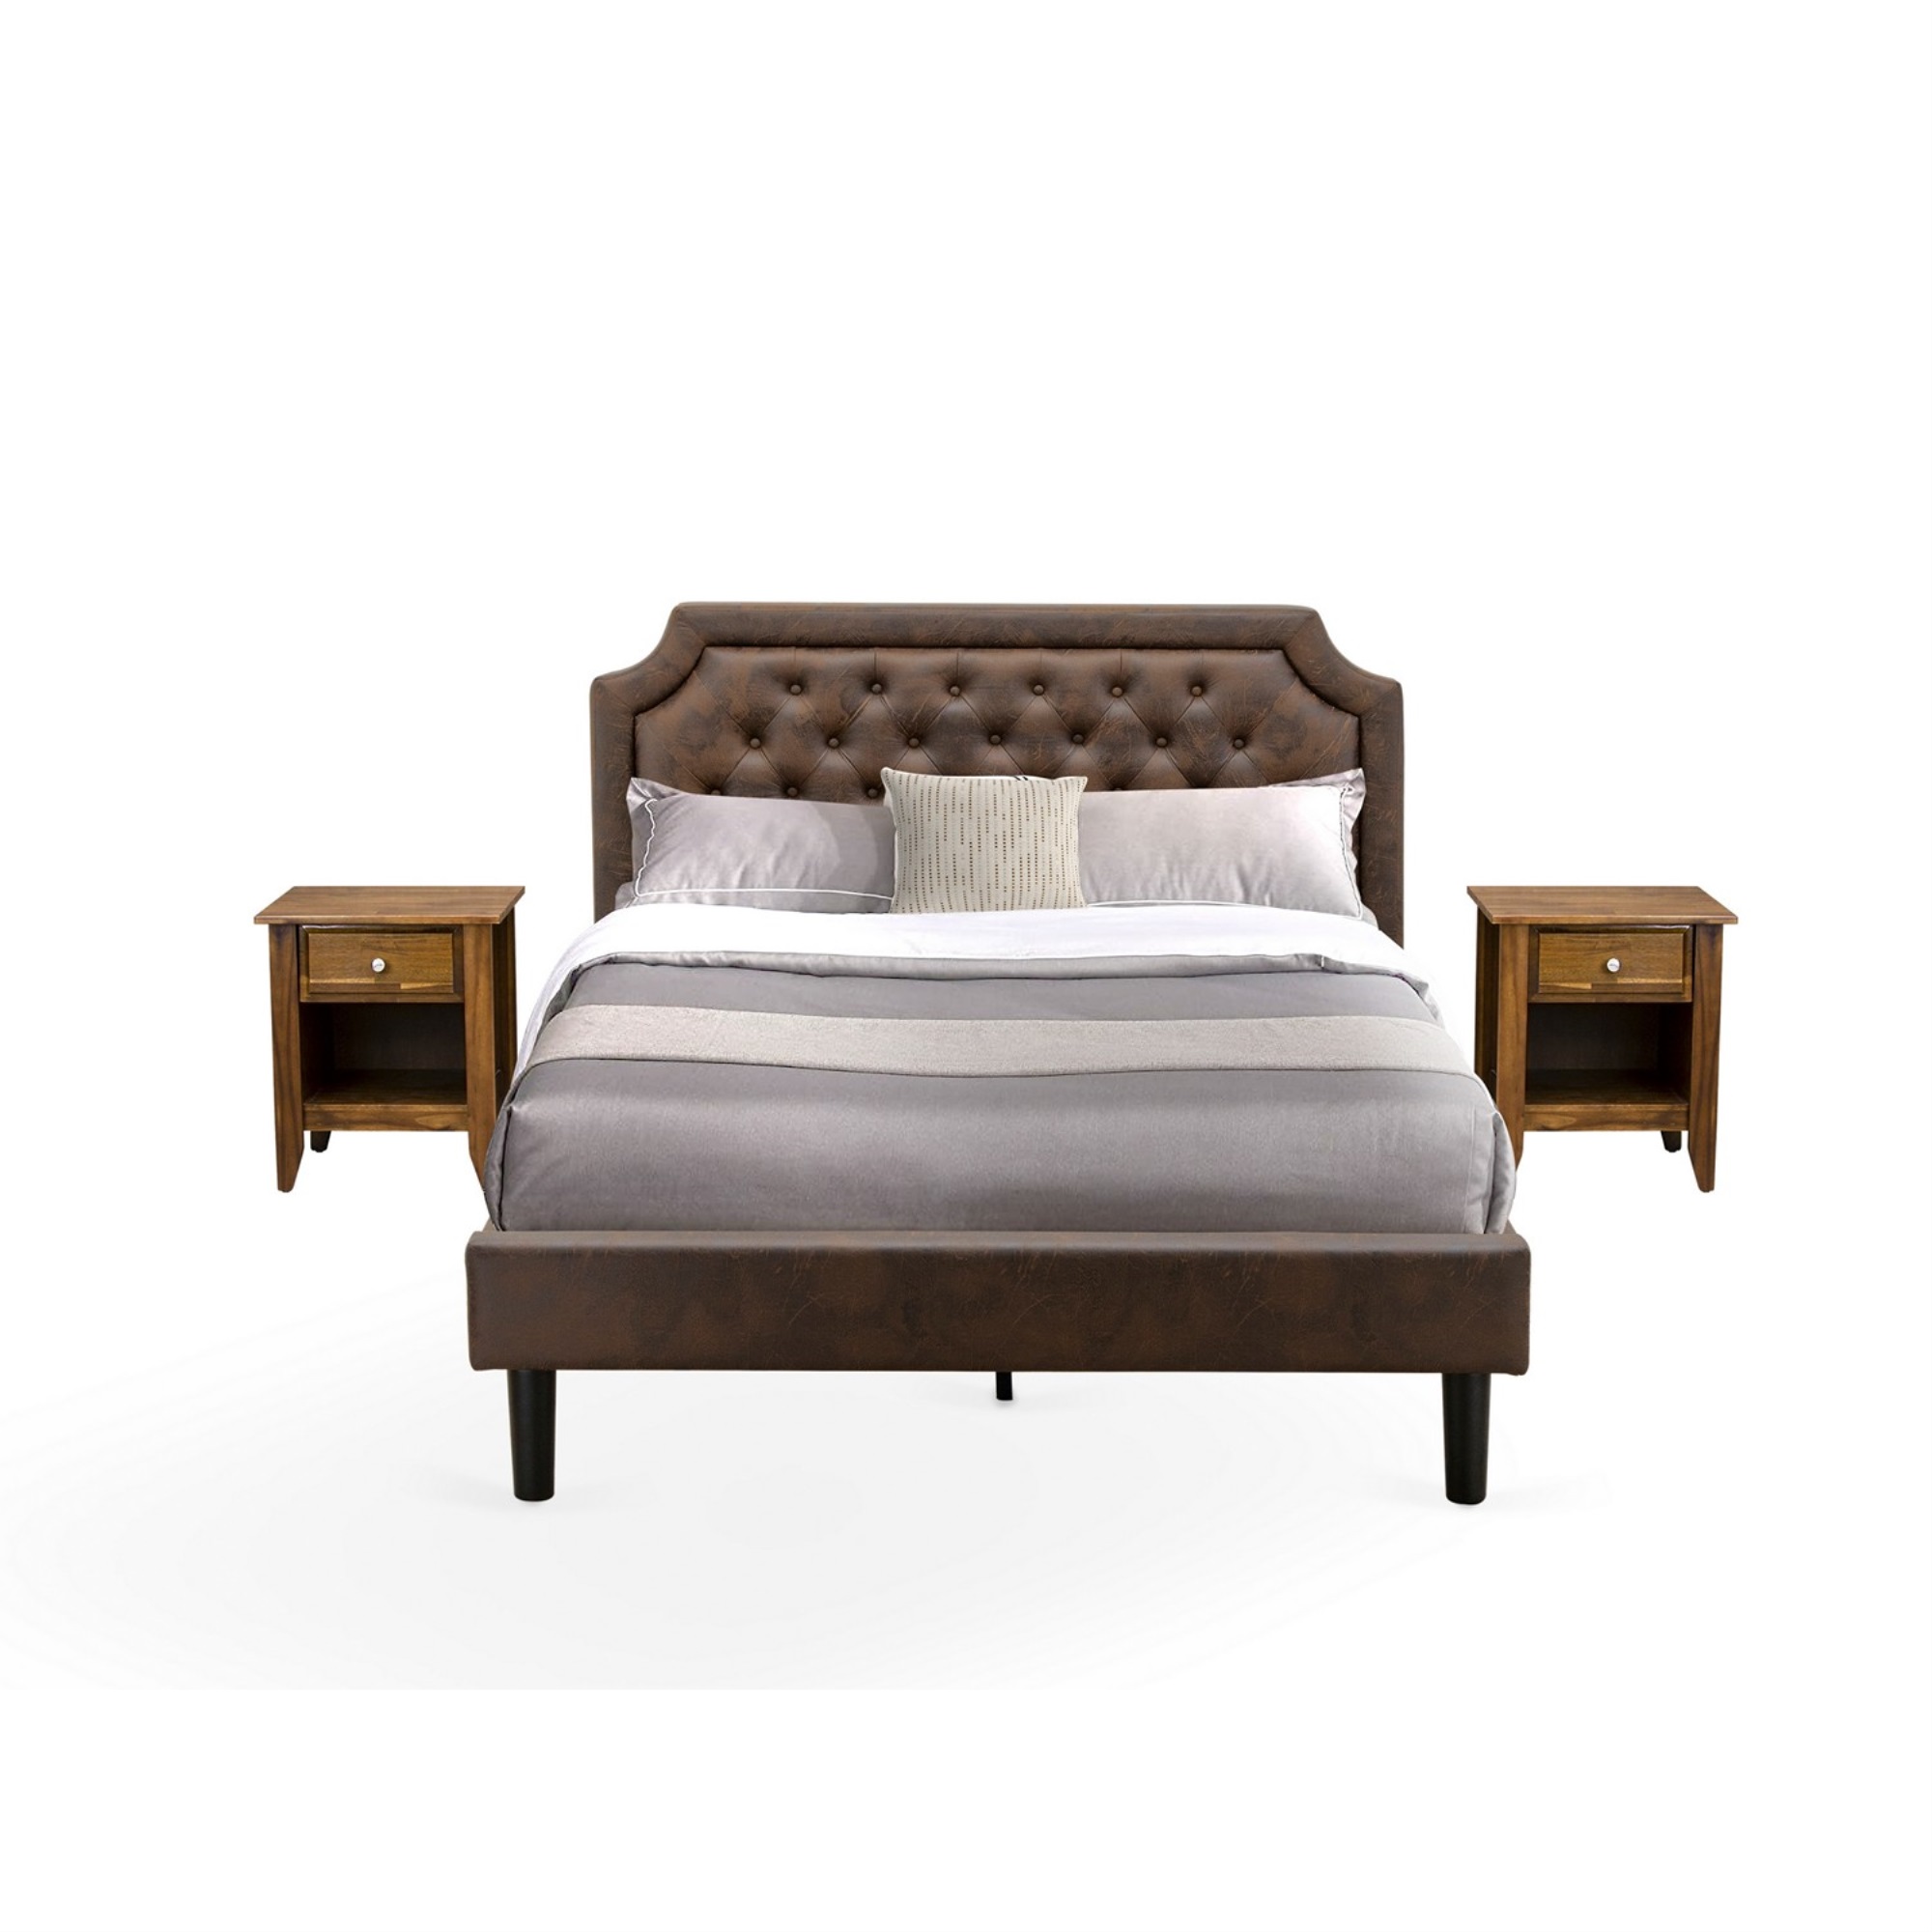 East West Furniture GB25Q-2GA08 3-Piece Platform Bed Set with Button Tufted Queen Size Bed and 2 Antique Walnut Night Stands - Dark Brown Faux Lea